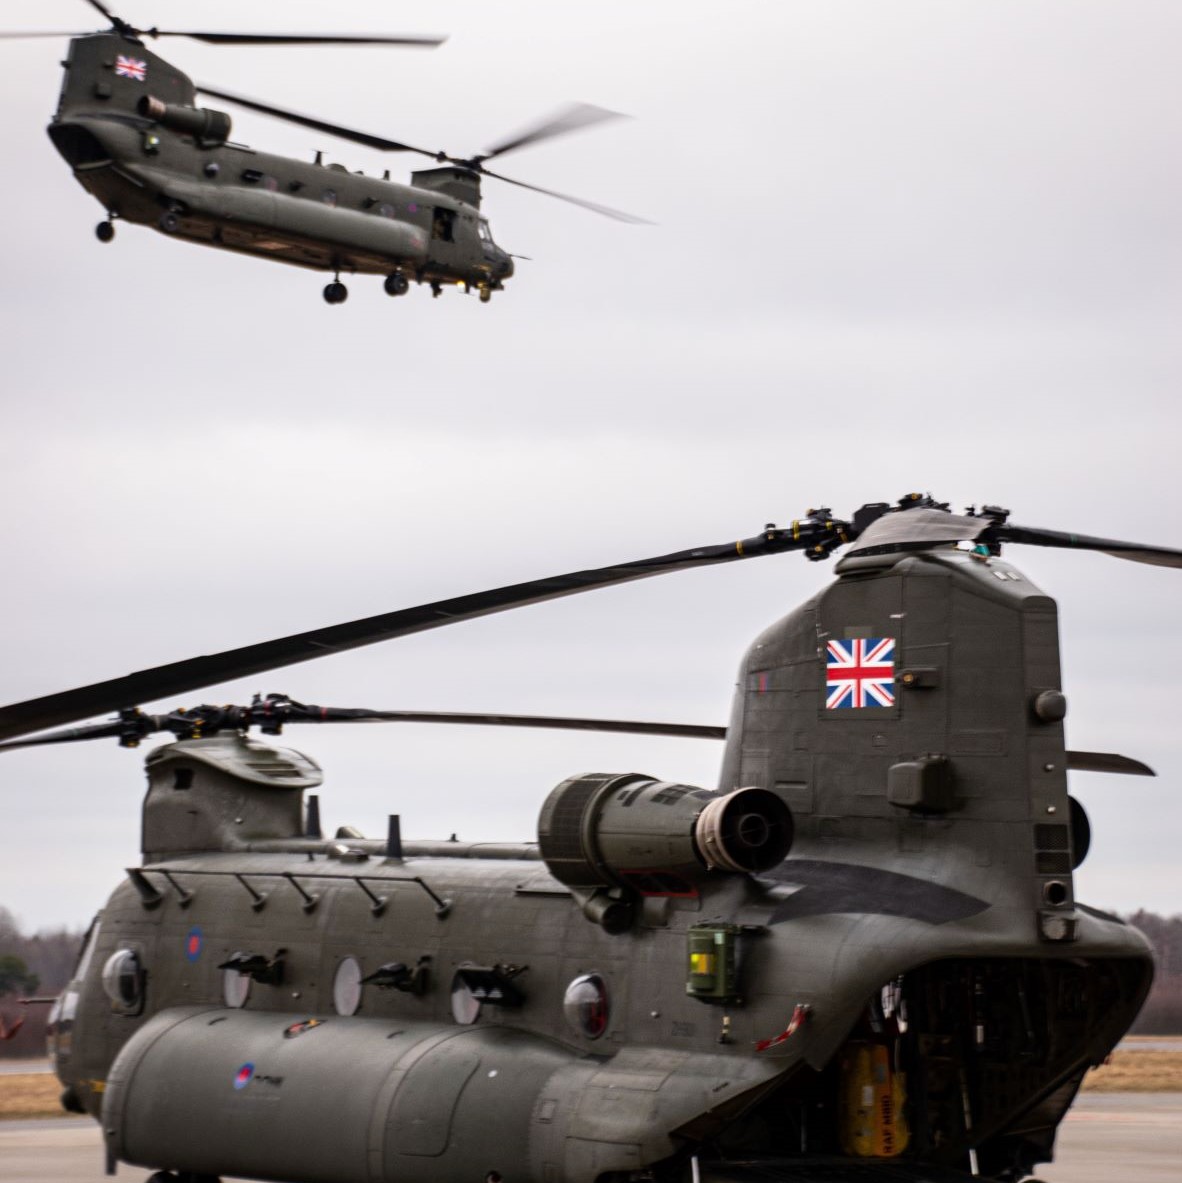 Image shows RAF Chinook flying over another Chinook on the airfield.